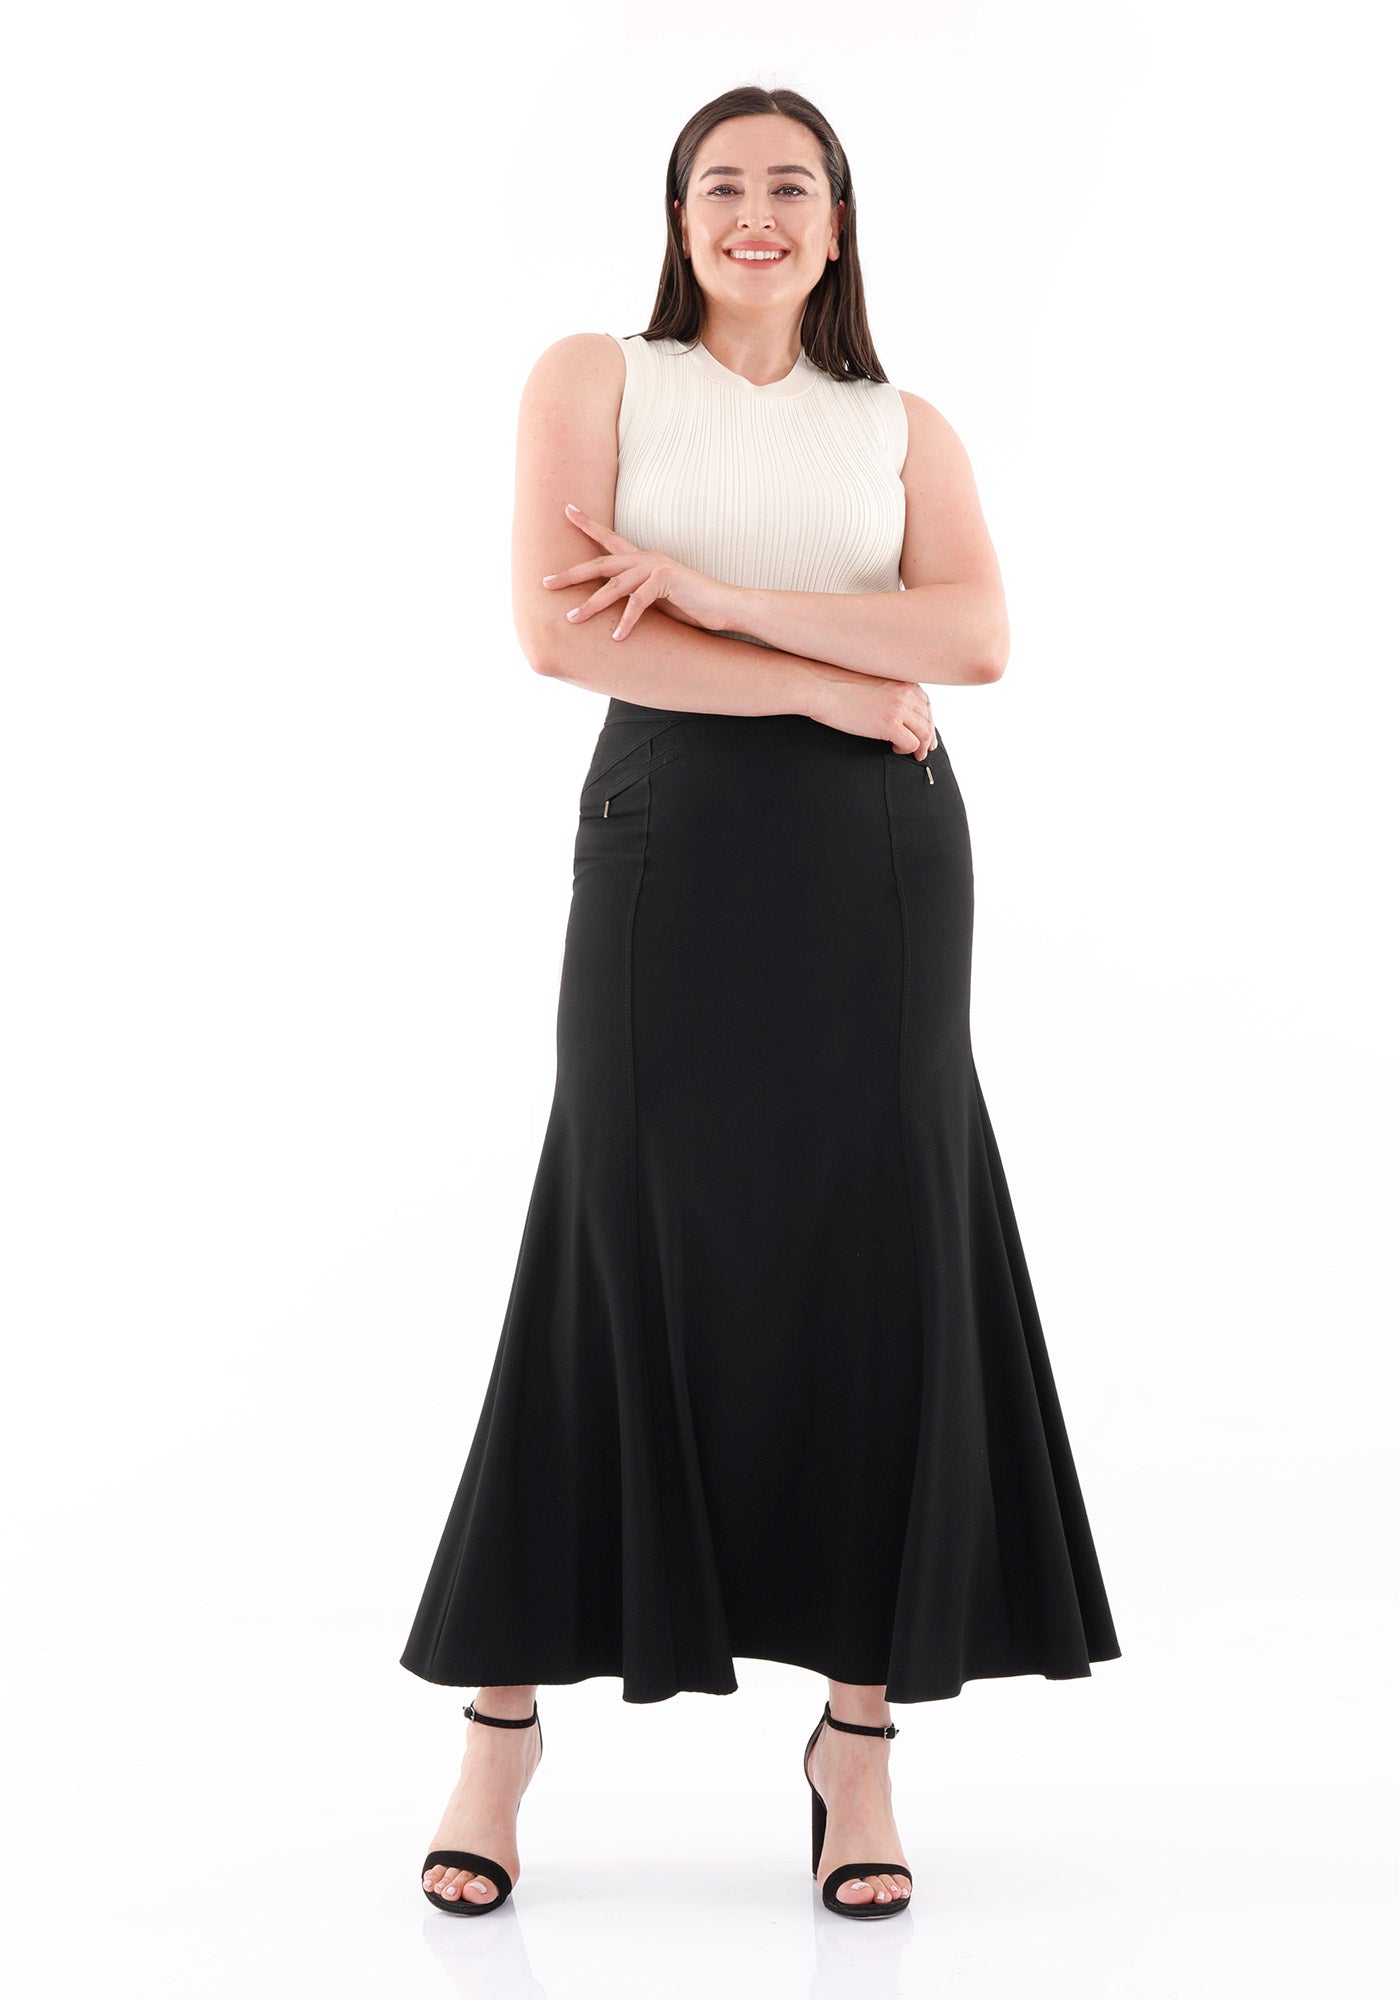 Plus size long skirts: Flattering Fashion for Every Occasion插图1